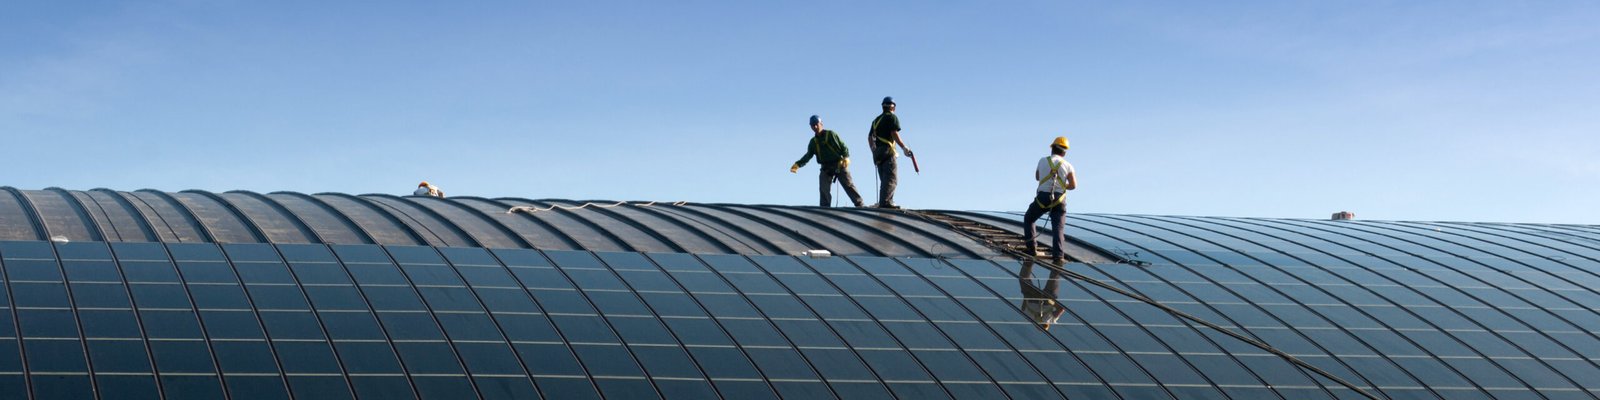 Workers on a large curved roof installing solar panels